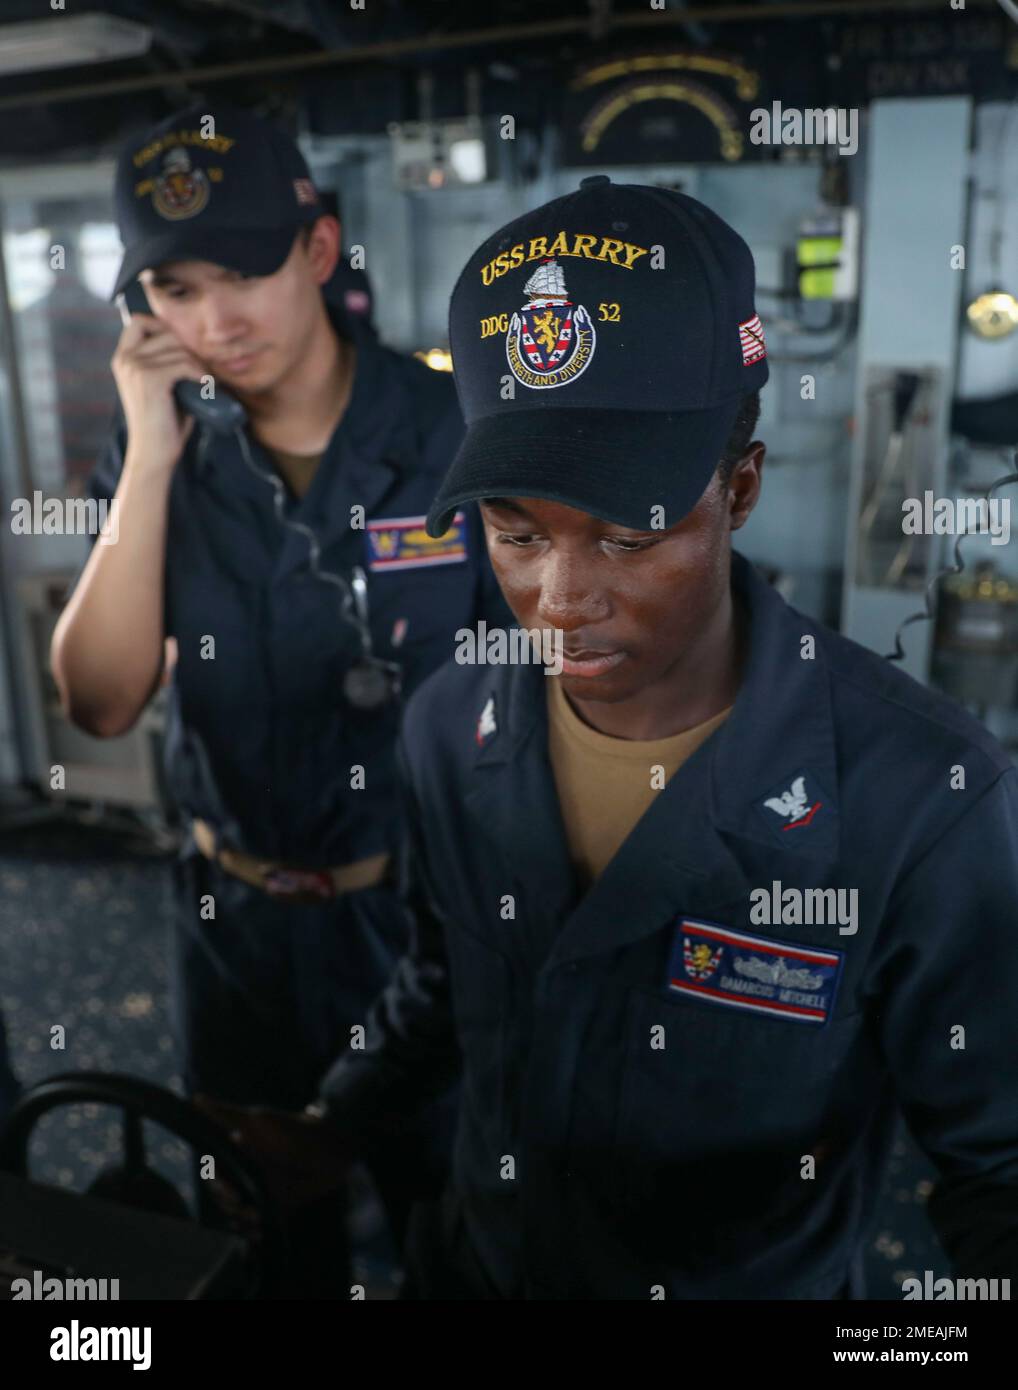 YOKOSUKA (Aug. 15, 2022) – Boatswain’s Mate 3rd Class Damarcus Mitchell, from Tampa Bay, Florida, pilots Arleigh Burke-class guided-missile destroyer USS Barry (DDG 52) with Lt. j.g. Thomas Barr, from Chula Vista, California, by his side Aug. 15 in waters off the coast of Yokosuka. Barry is assigned to Commander, Task Force 71/Destroyer Squadron (DESRON) 15, the Navy’s largest forward-deployed DESRON and the U.S. 7th Fleet’s principal surface force. Stock Photo